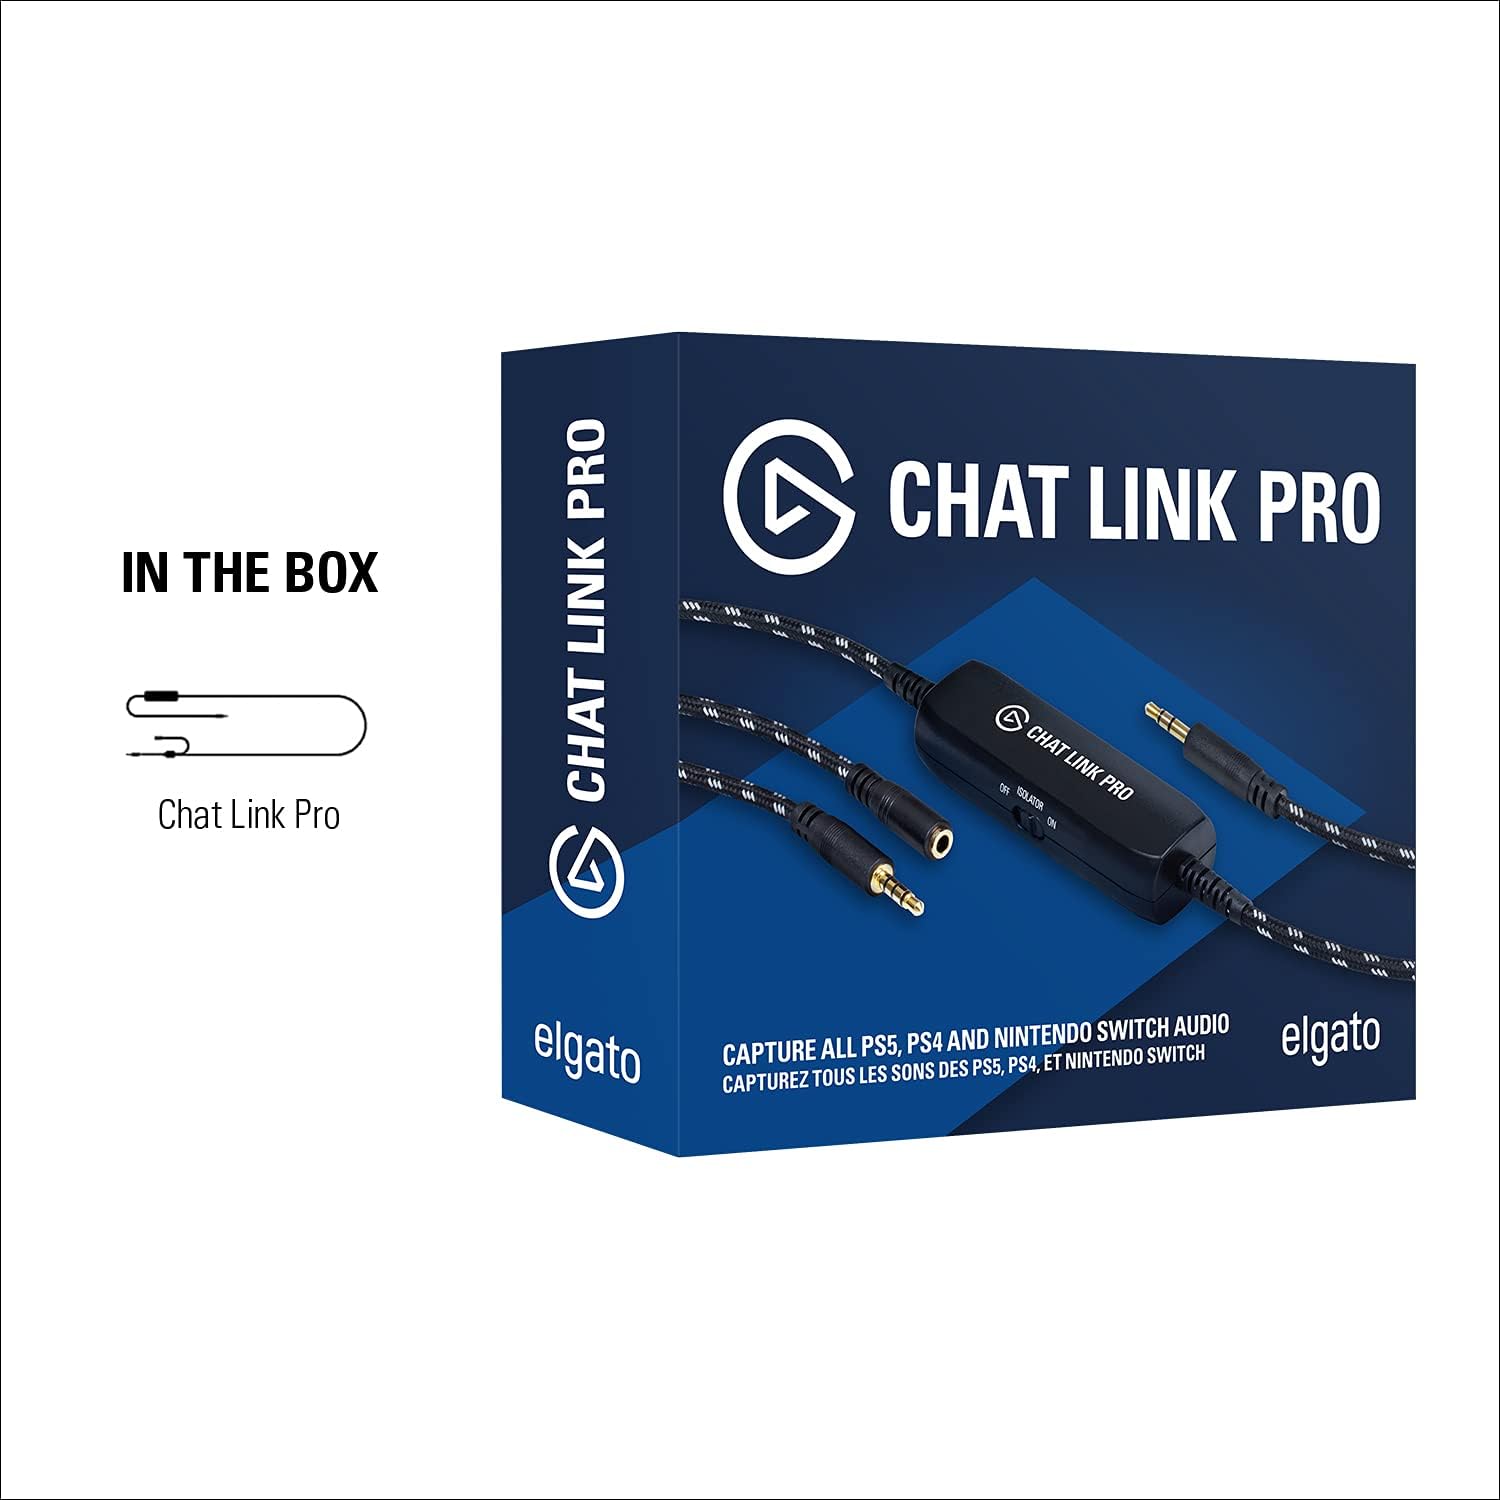 Corsair Elgato Chat Link Pro Adapter: Capture voice and game audio from PS5, PS4, and Nintendo Switch. 0840006644064